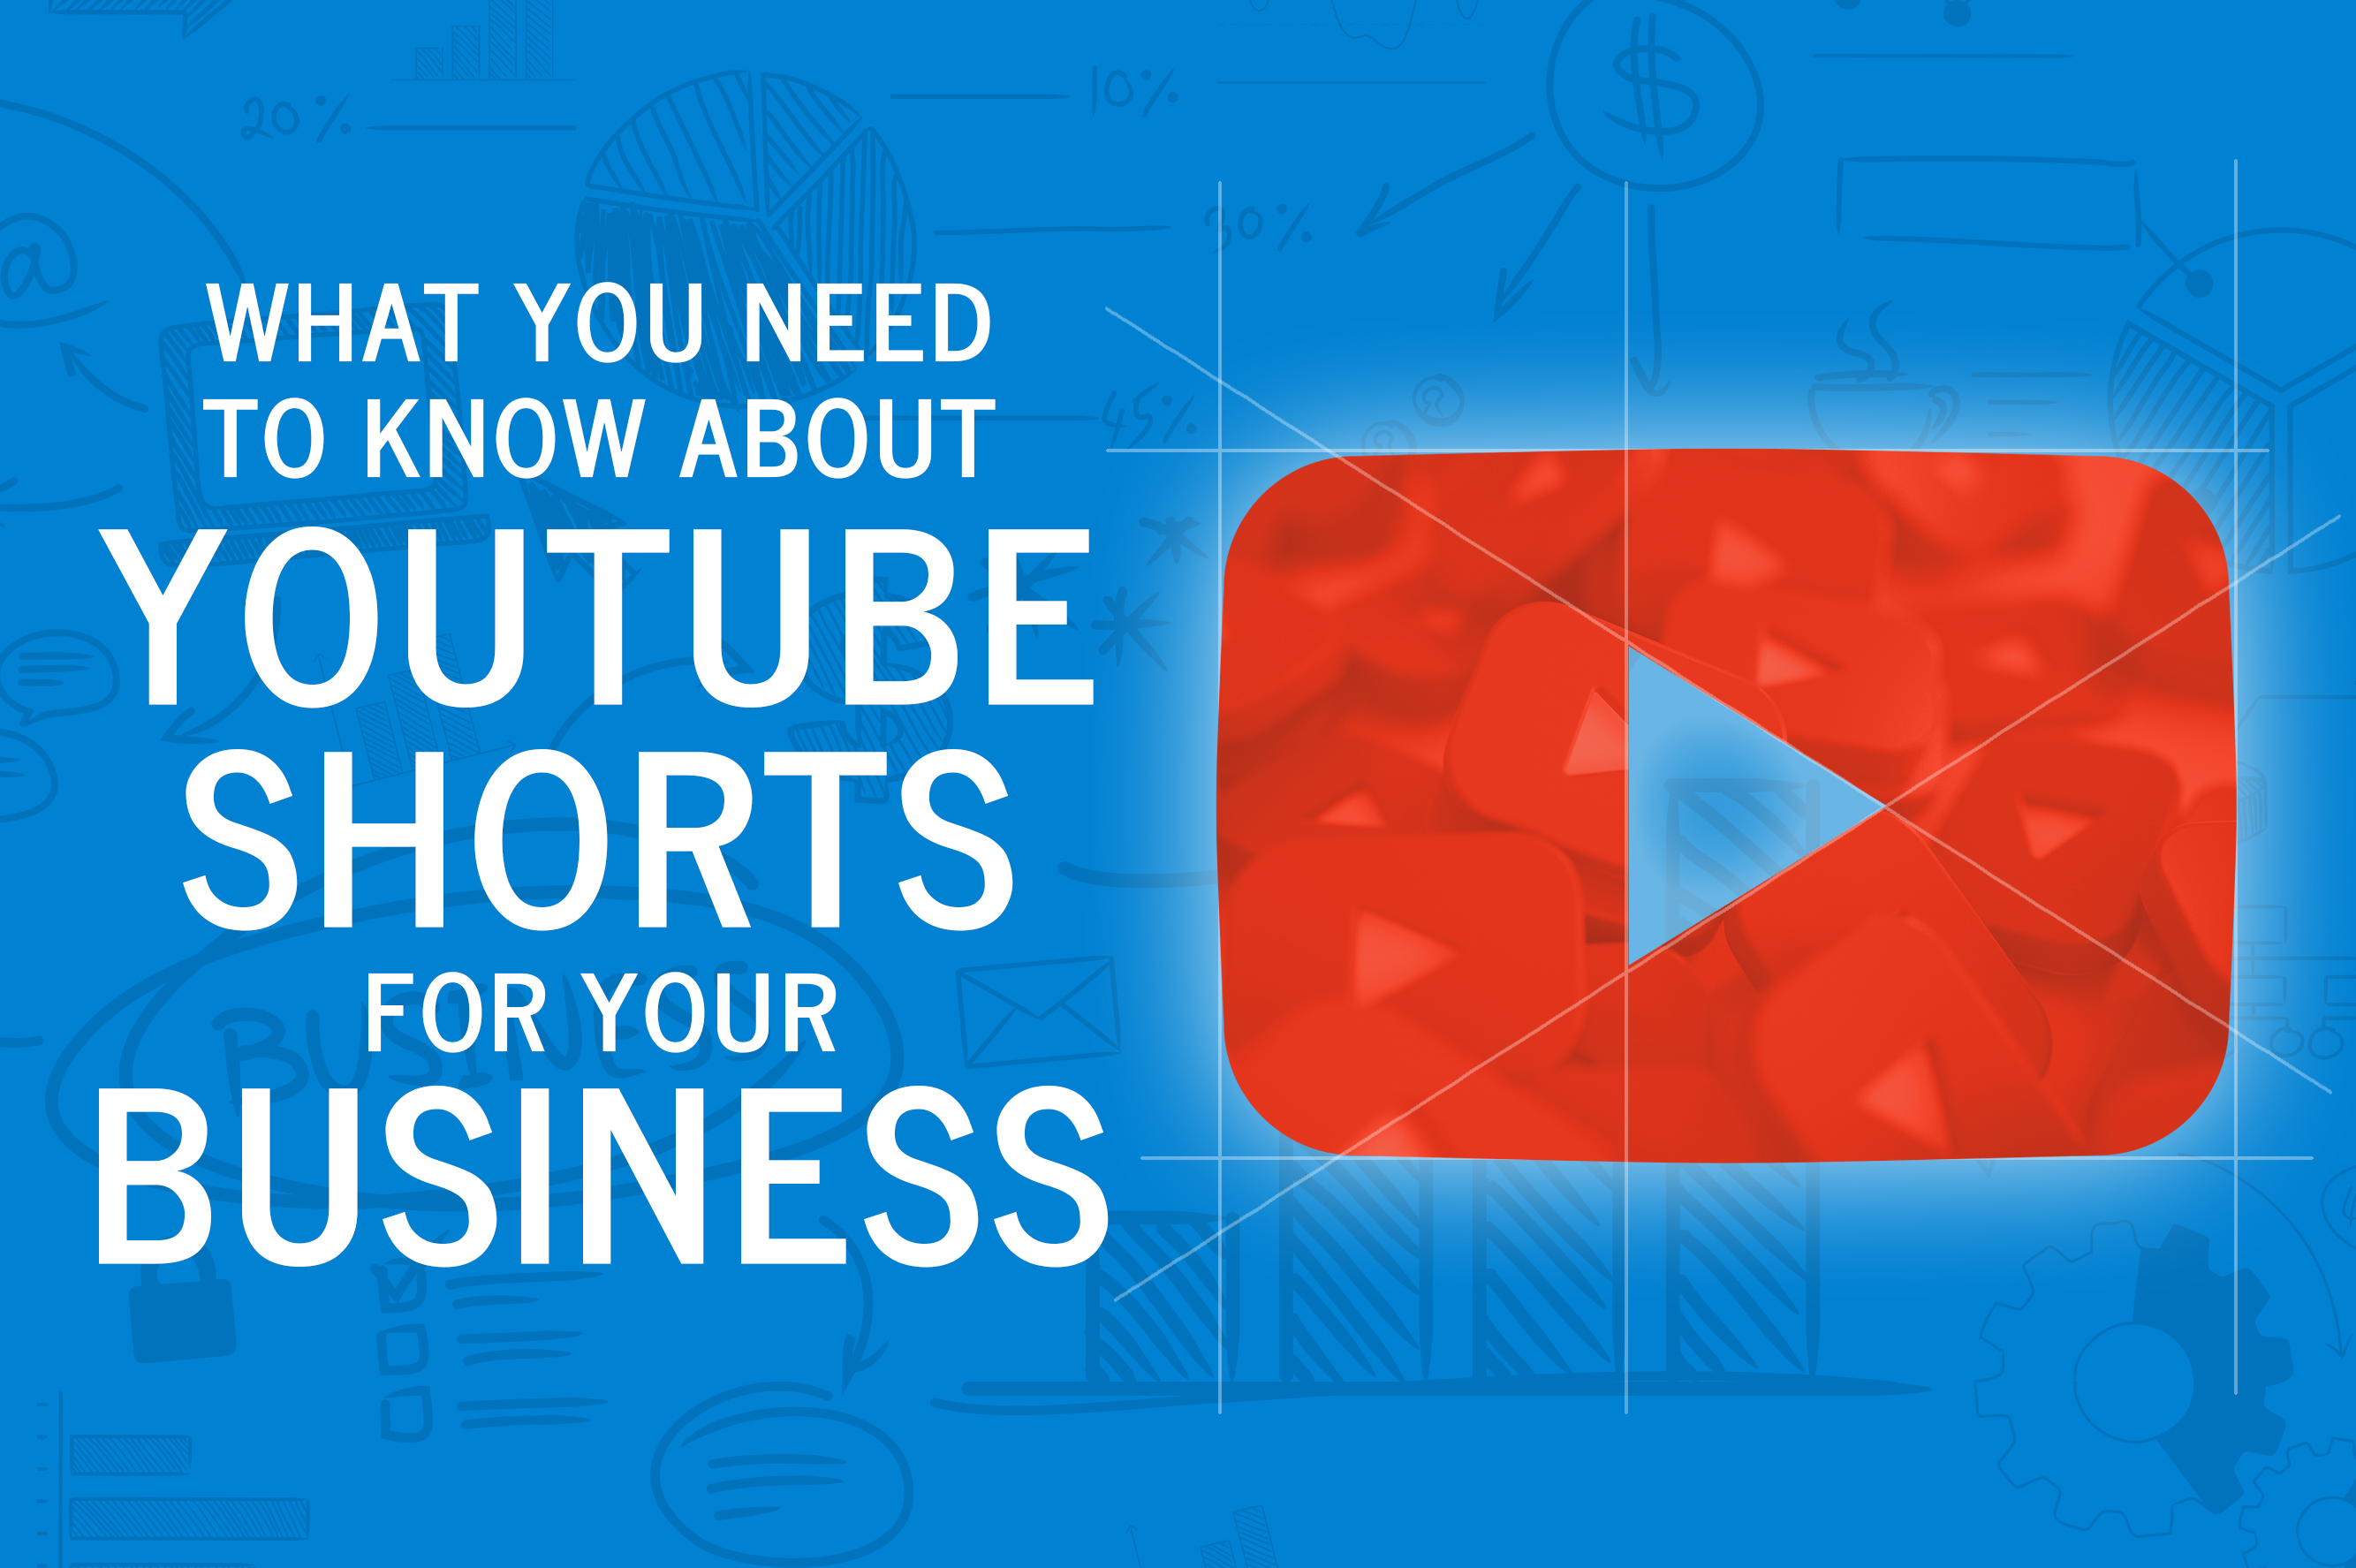 What You Need to Know About YouTube Shorts for Your Business